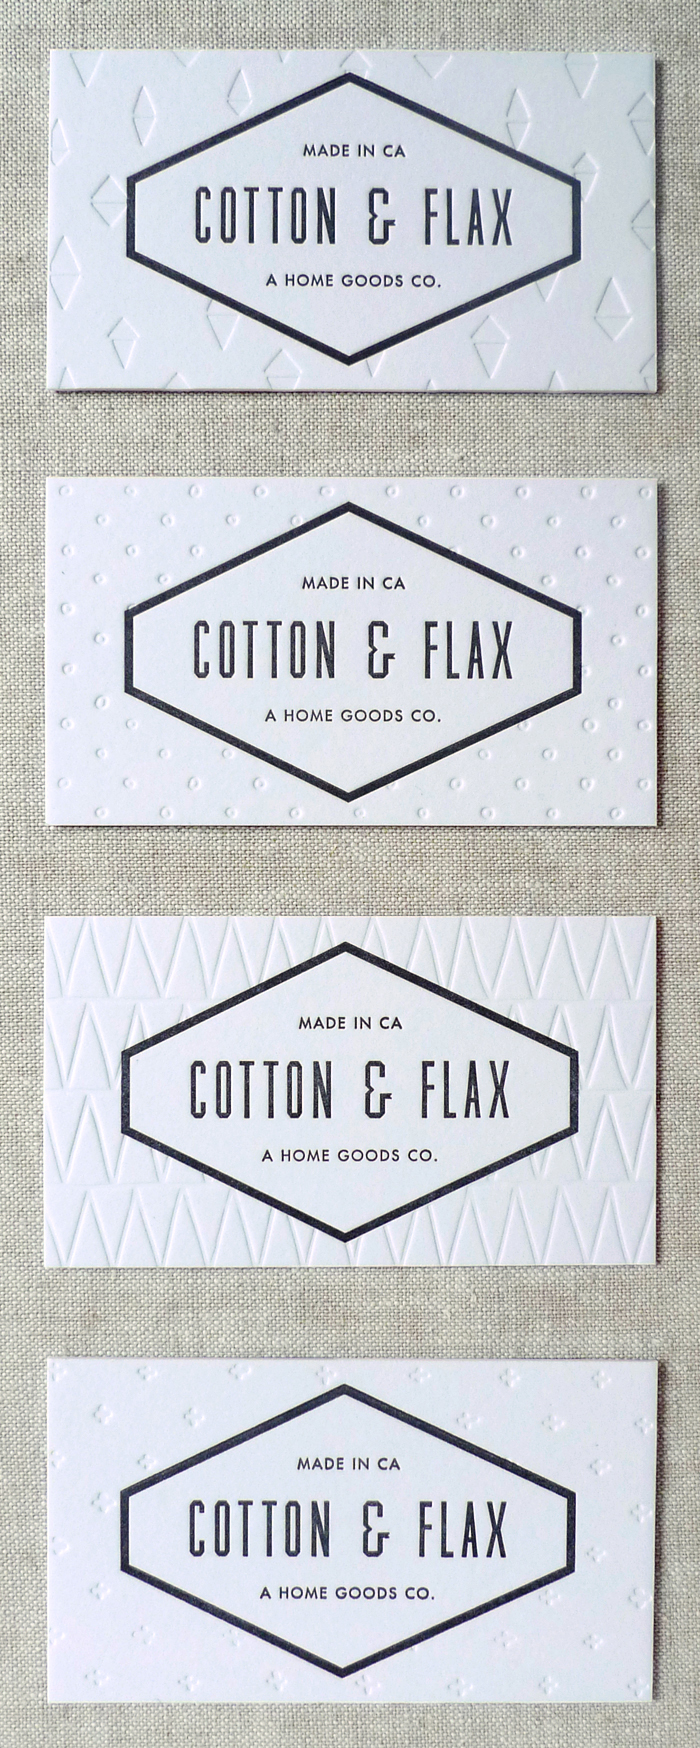 Cotton & Flax business cards